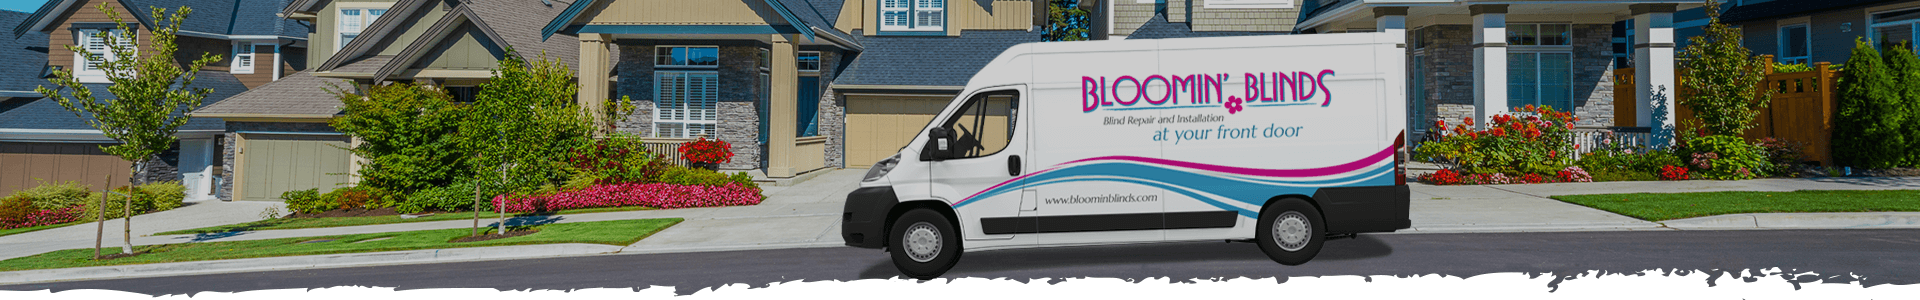 bloomin' blinds van out on a job